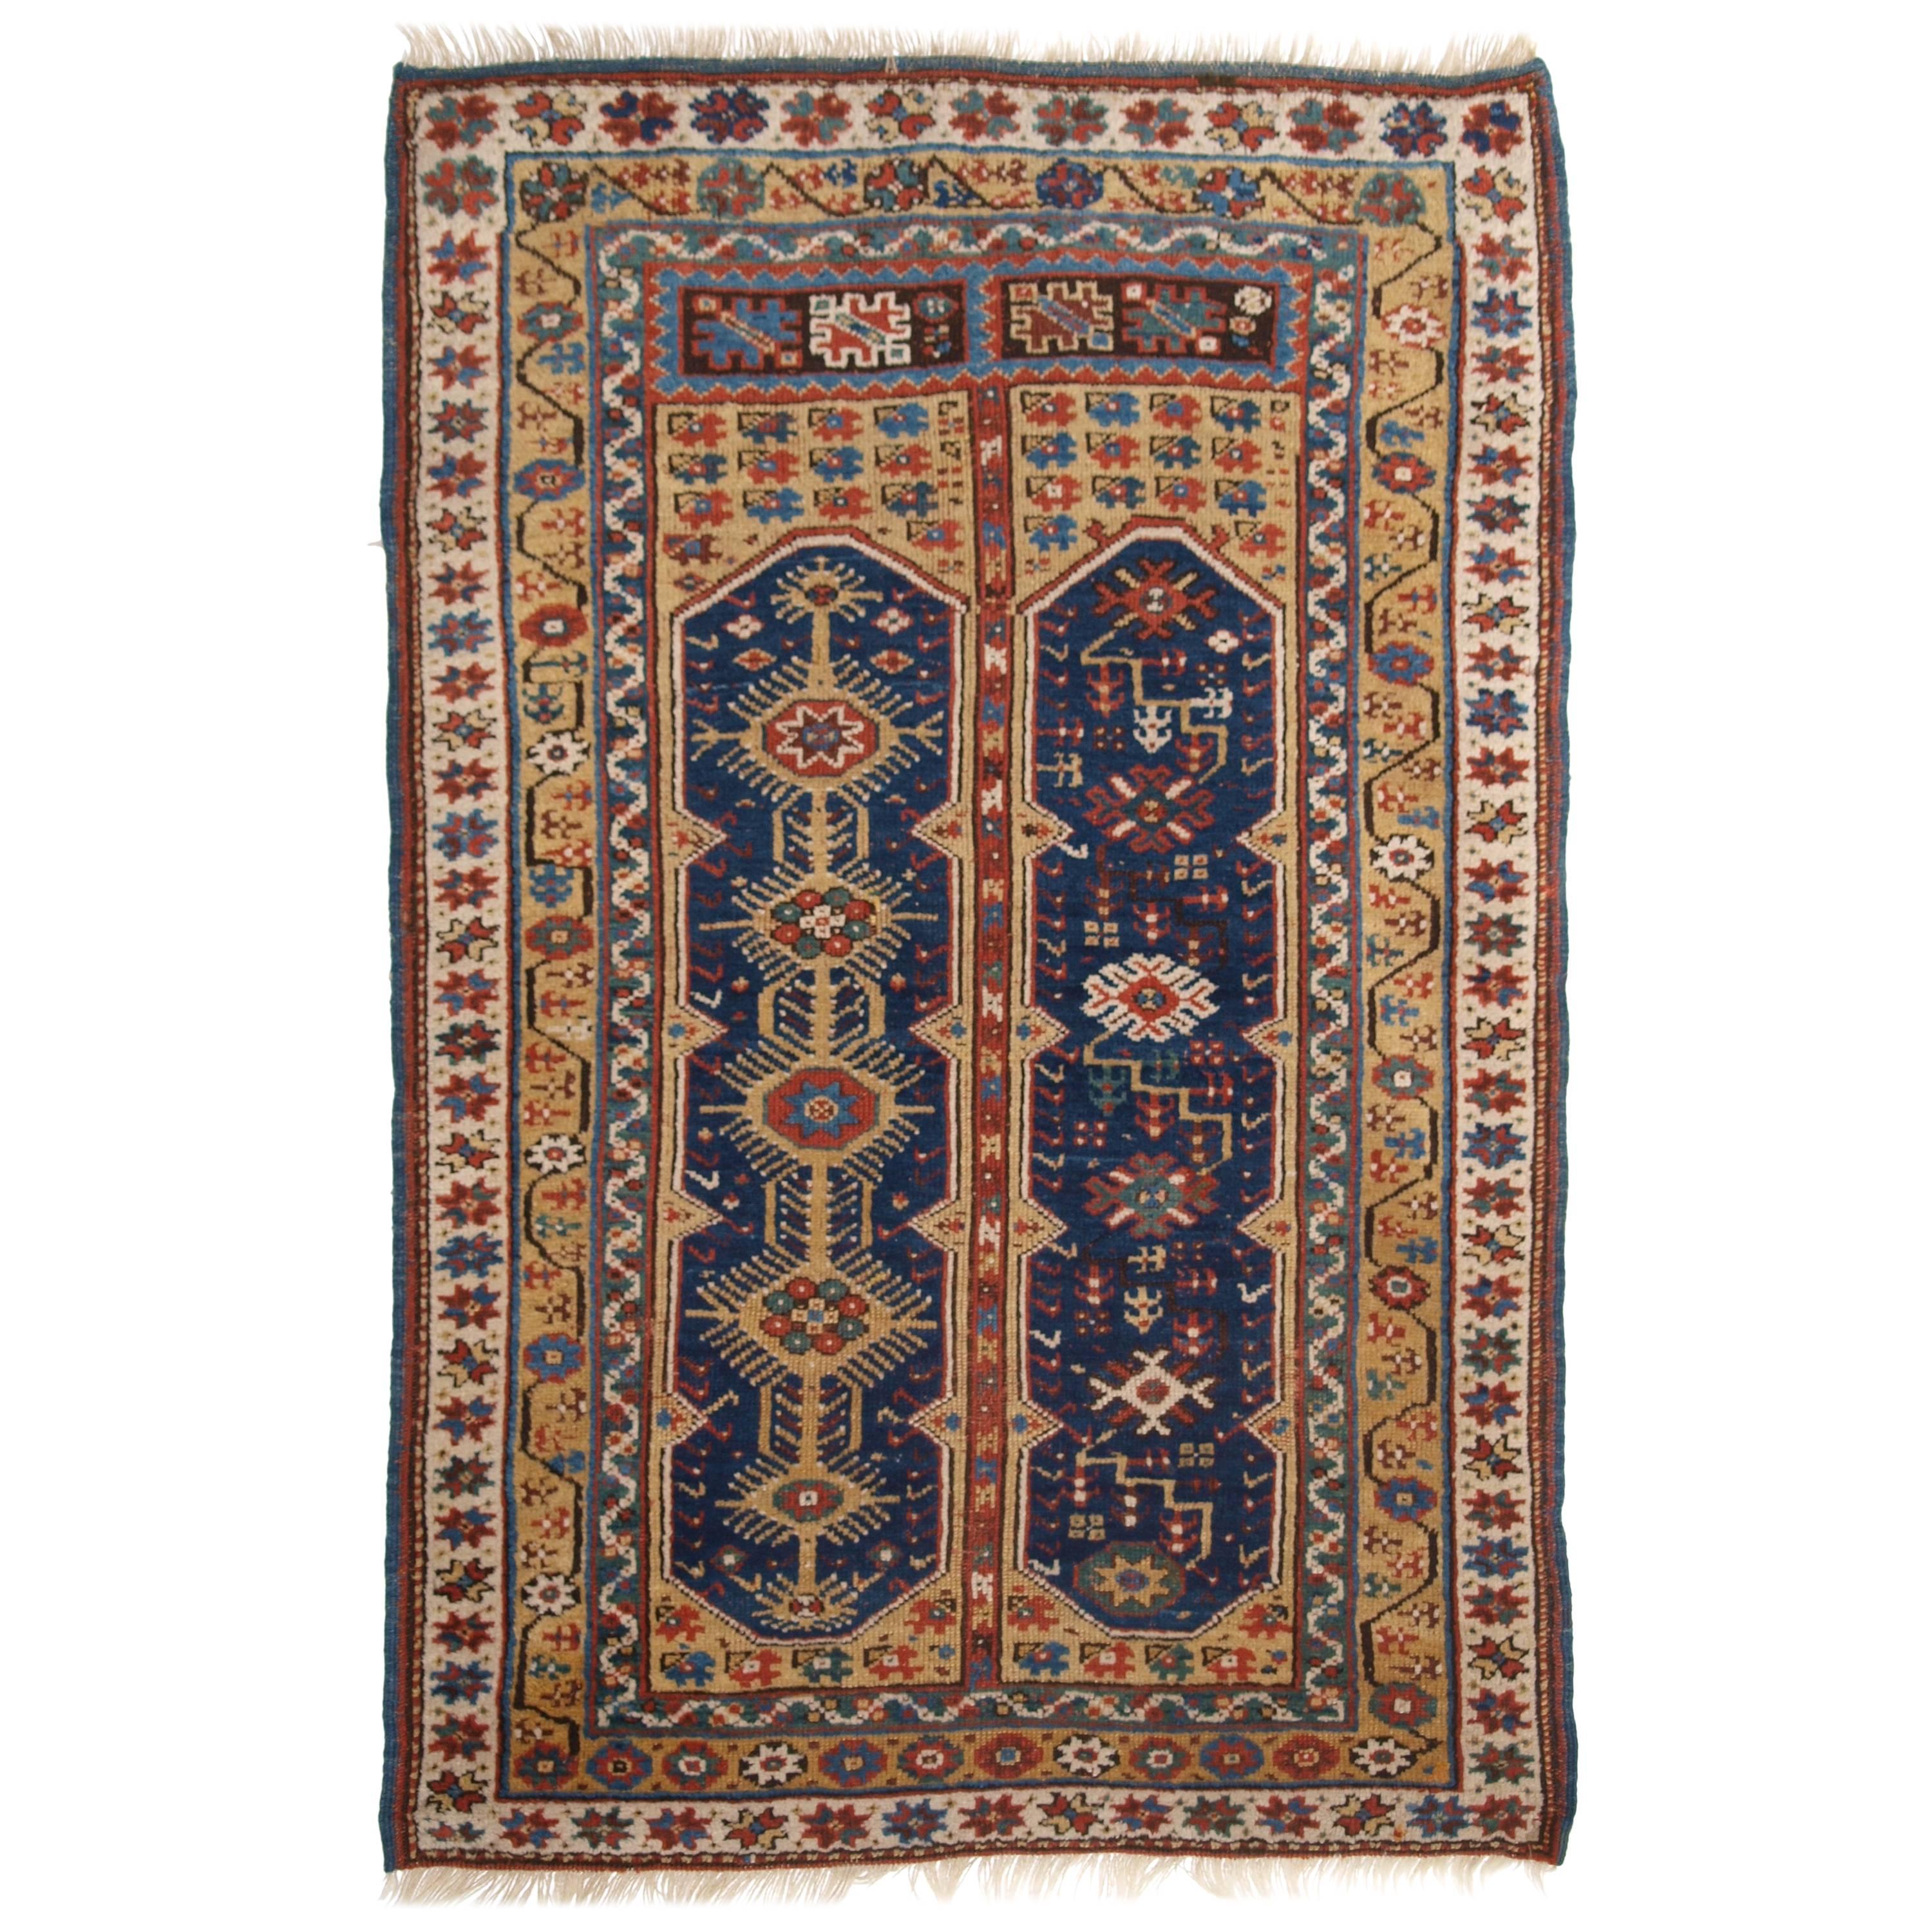 Antique Turkish Megri Prayer Rug with Yellow Field, Mid-19th Century For Sale